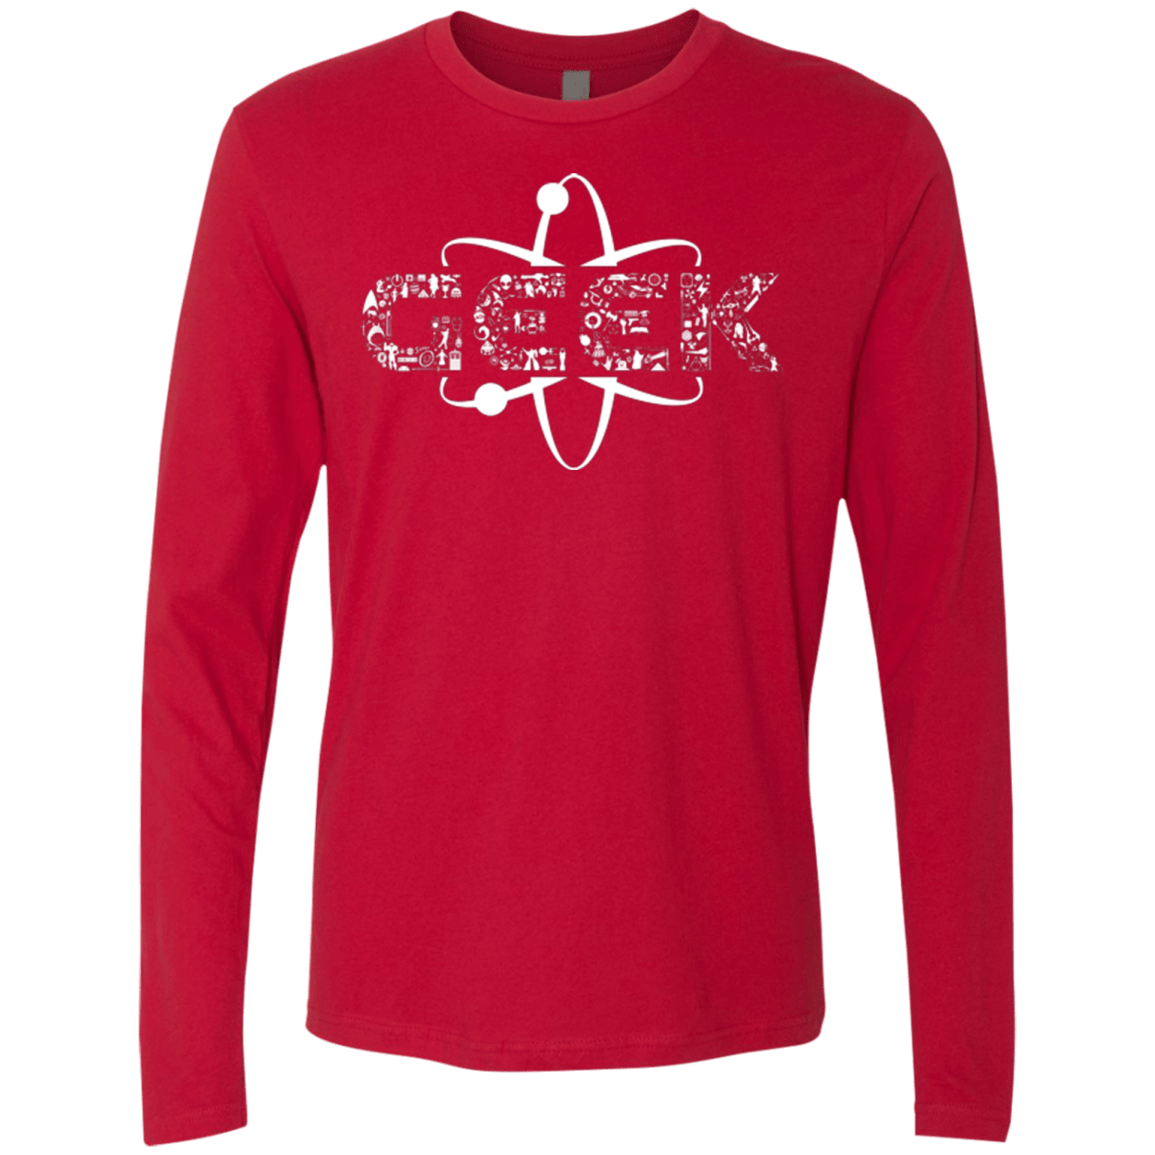 T-Shirts Red / Small I Geek Men's Premium Long Sleeve